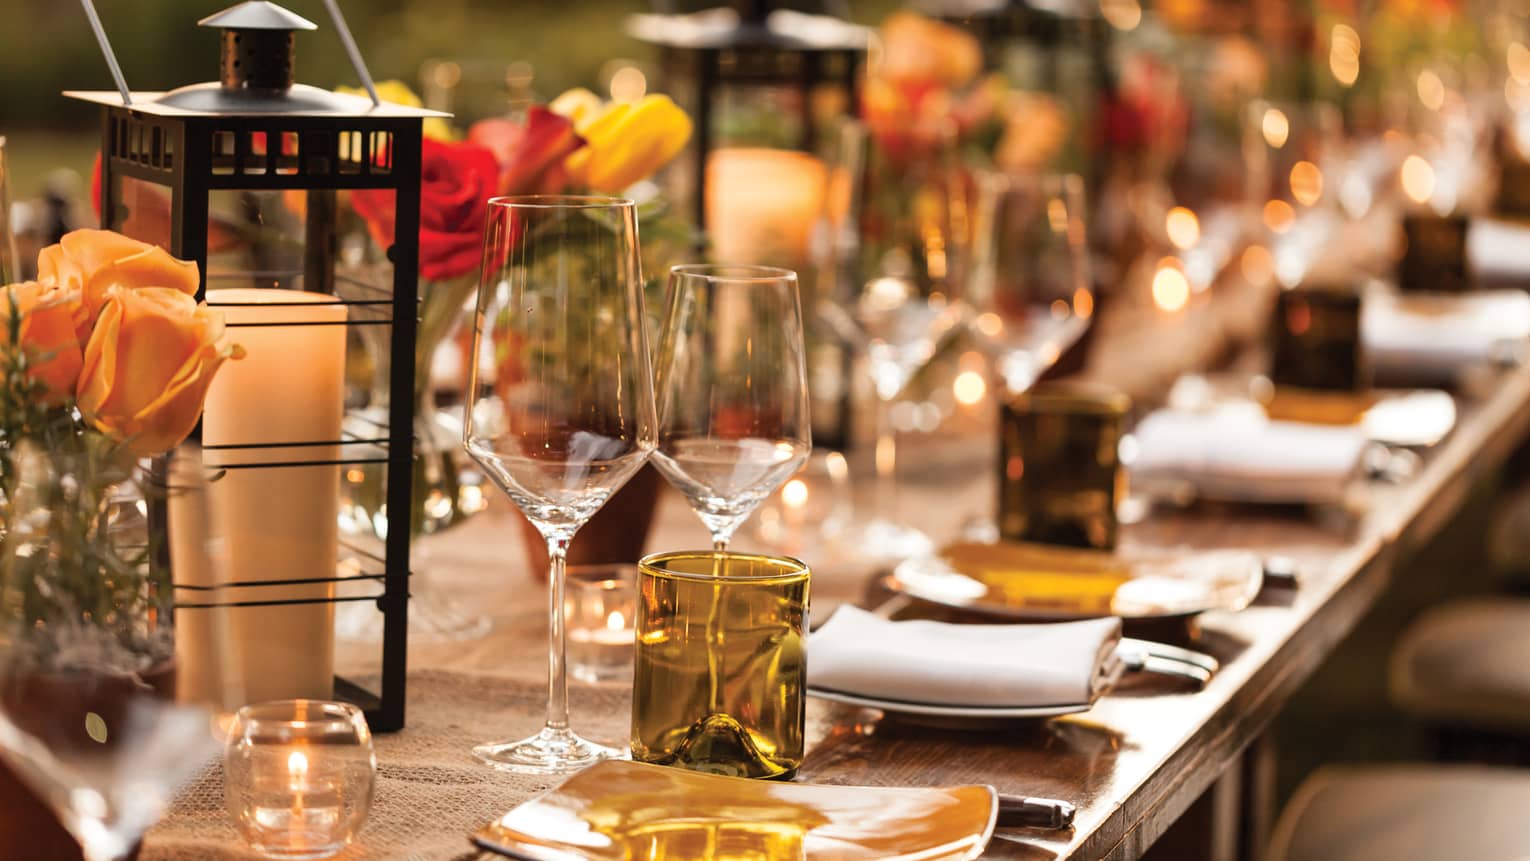 Table setting with orange, red and yellow flowers, wine glasses and candles.